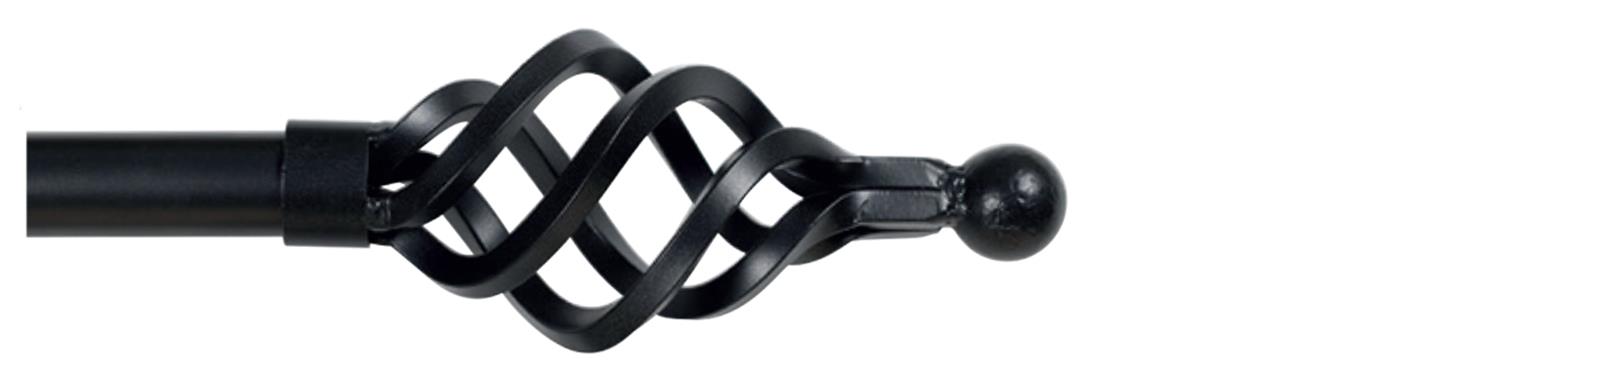 Cameron Fuller 32mm Metal Curtain Pole Black Cage